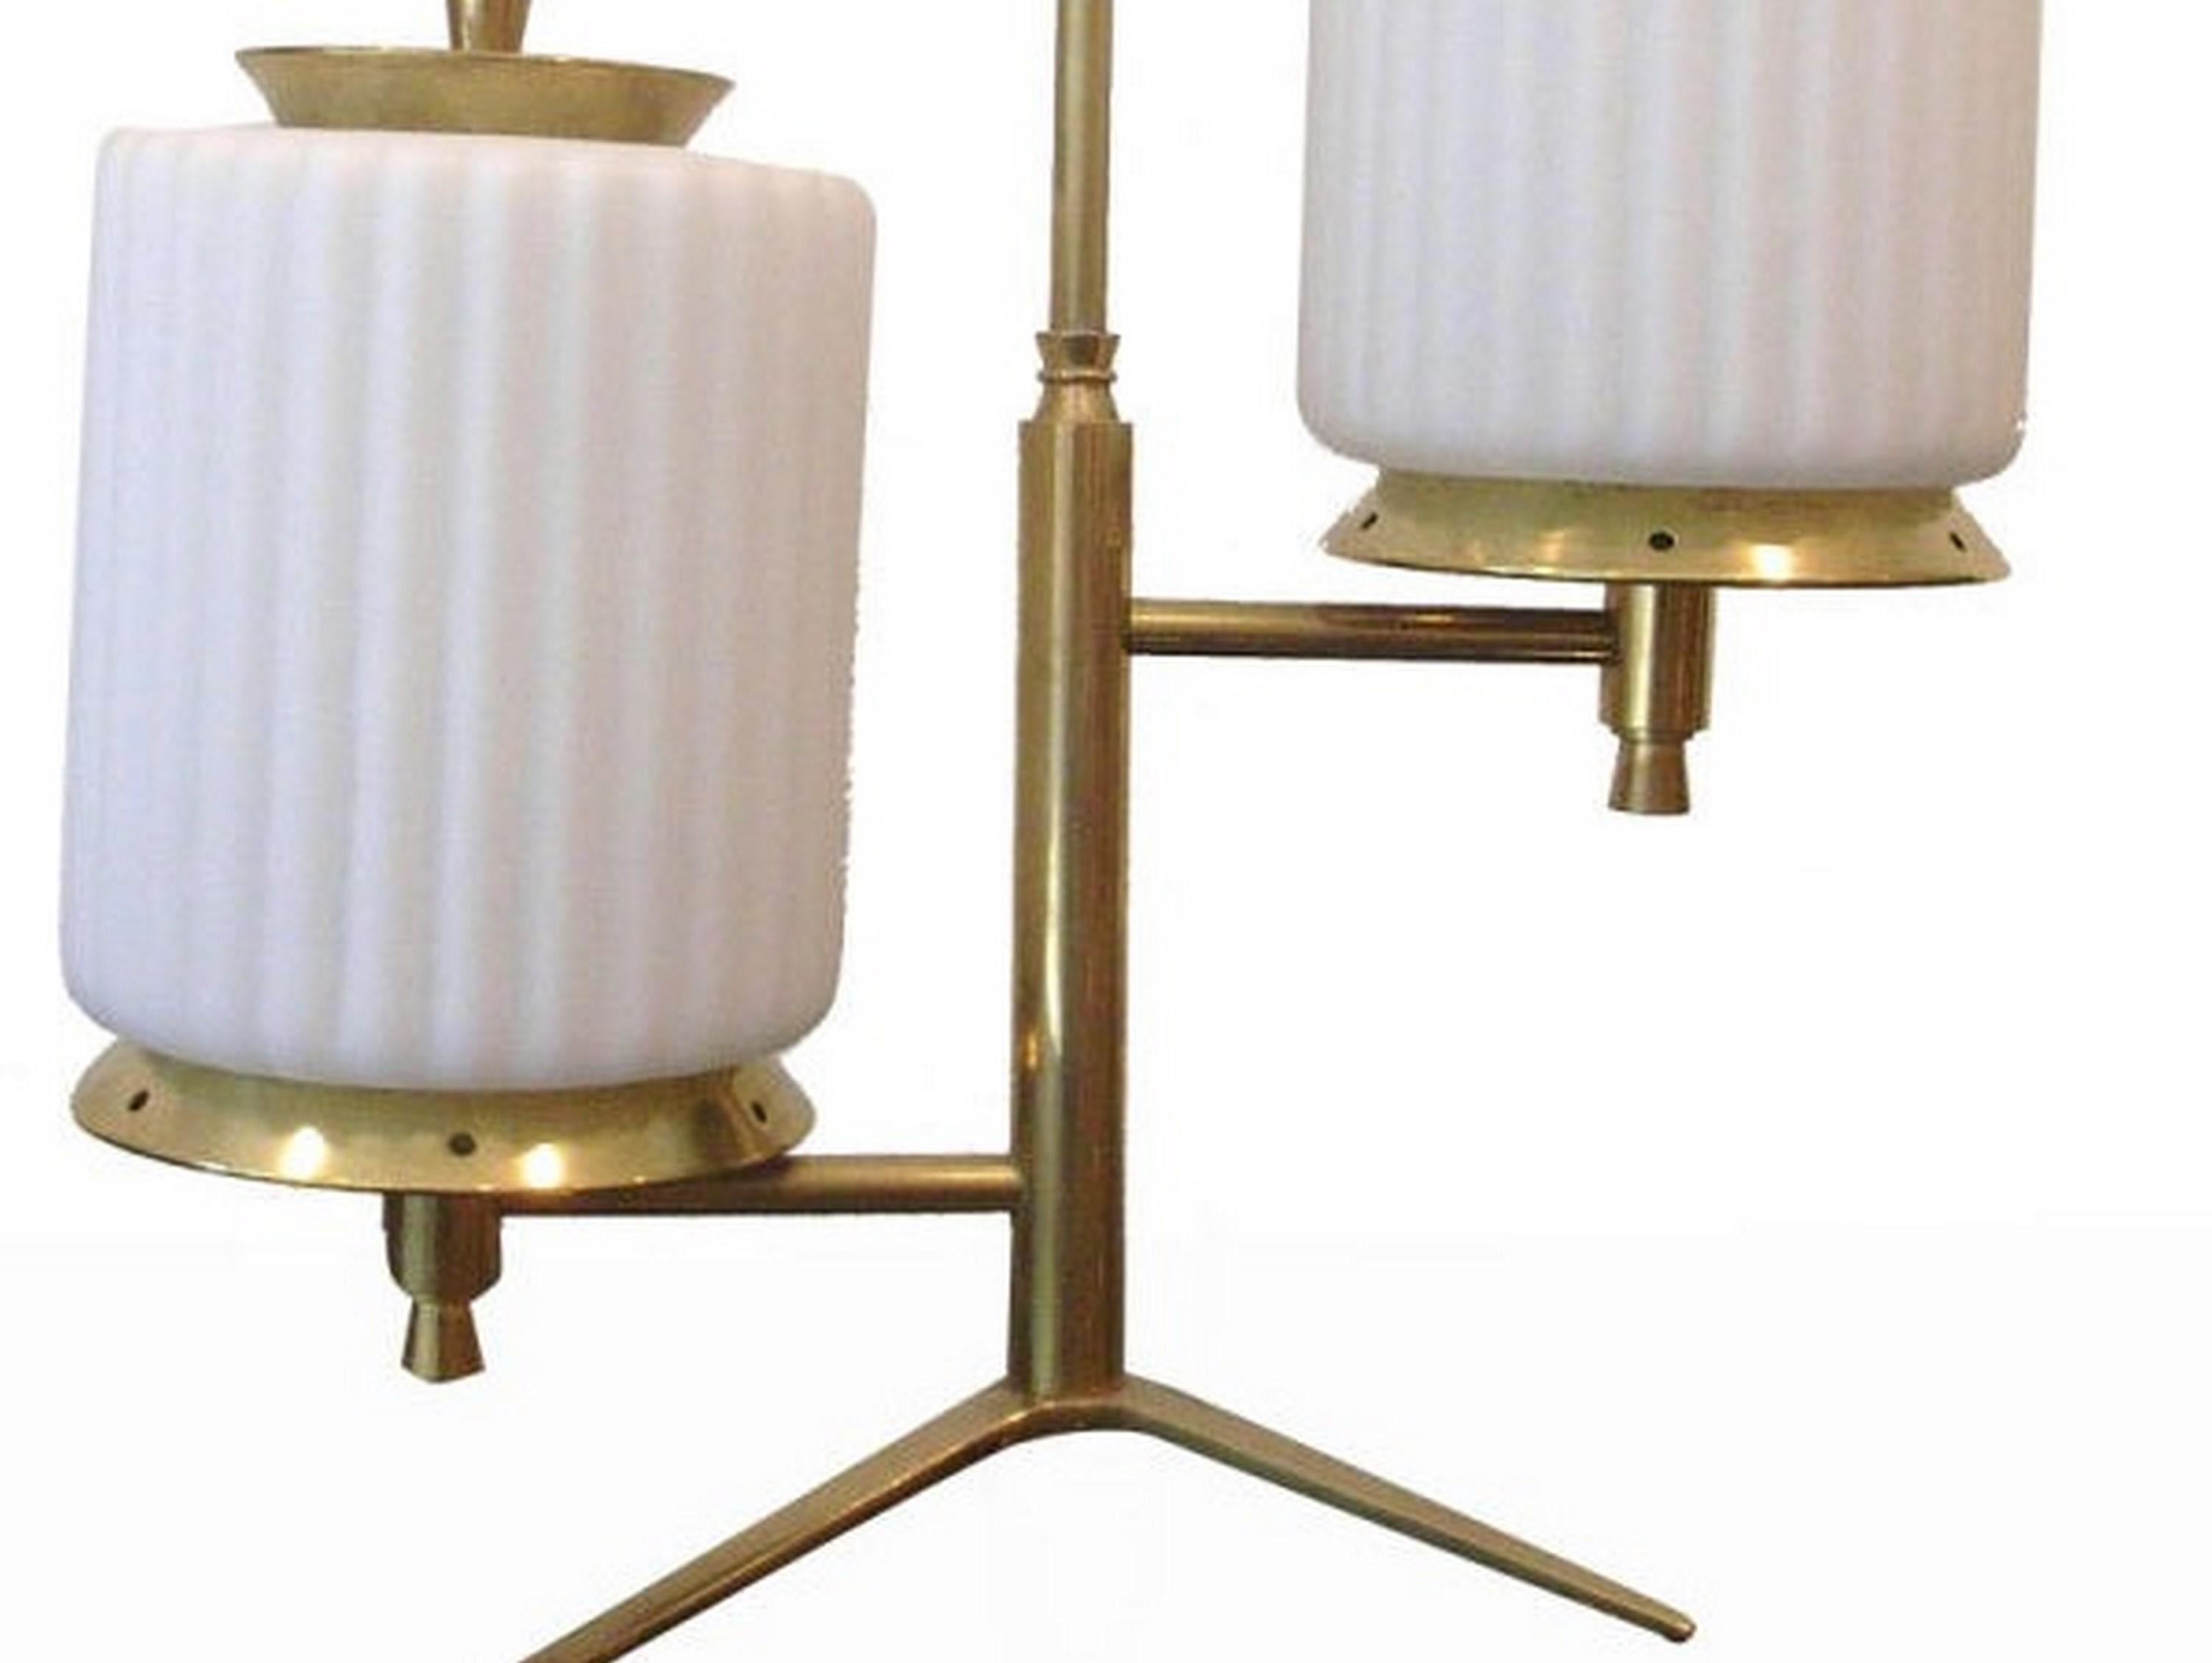 Italian Mid-Century Modern Brass and Glass Table Lamp Attributed to Arteluce